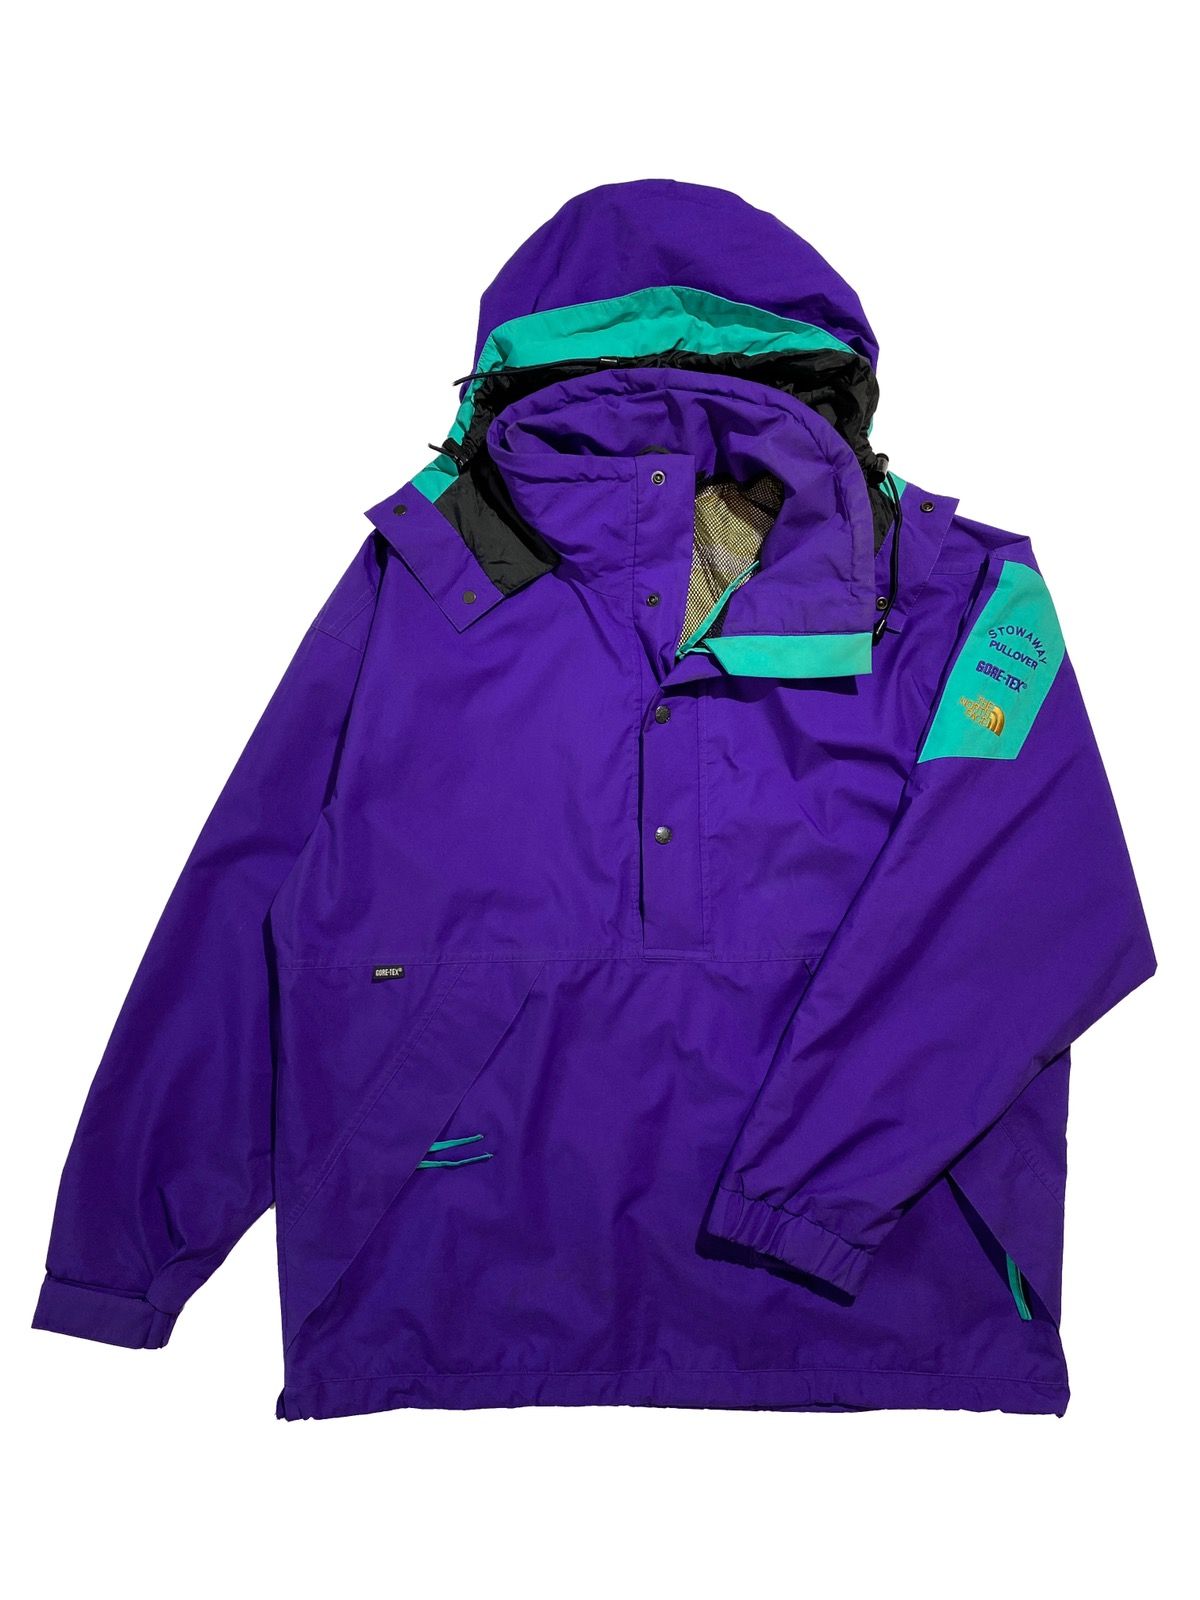 Vintage The North Face Stowaway Pullover gore tex anorak | Grailed